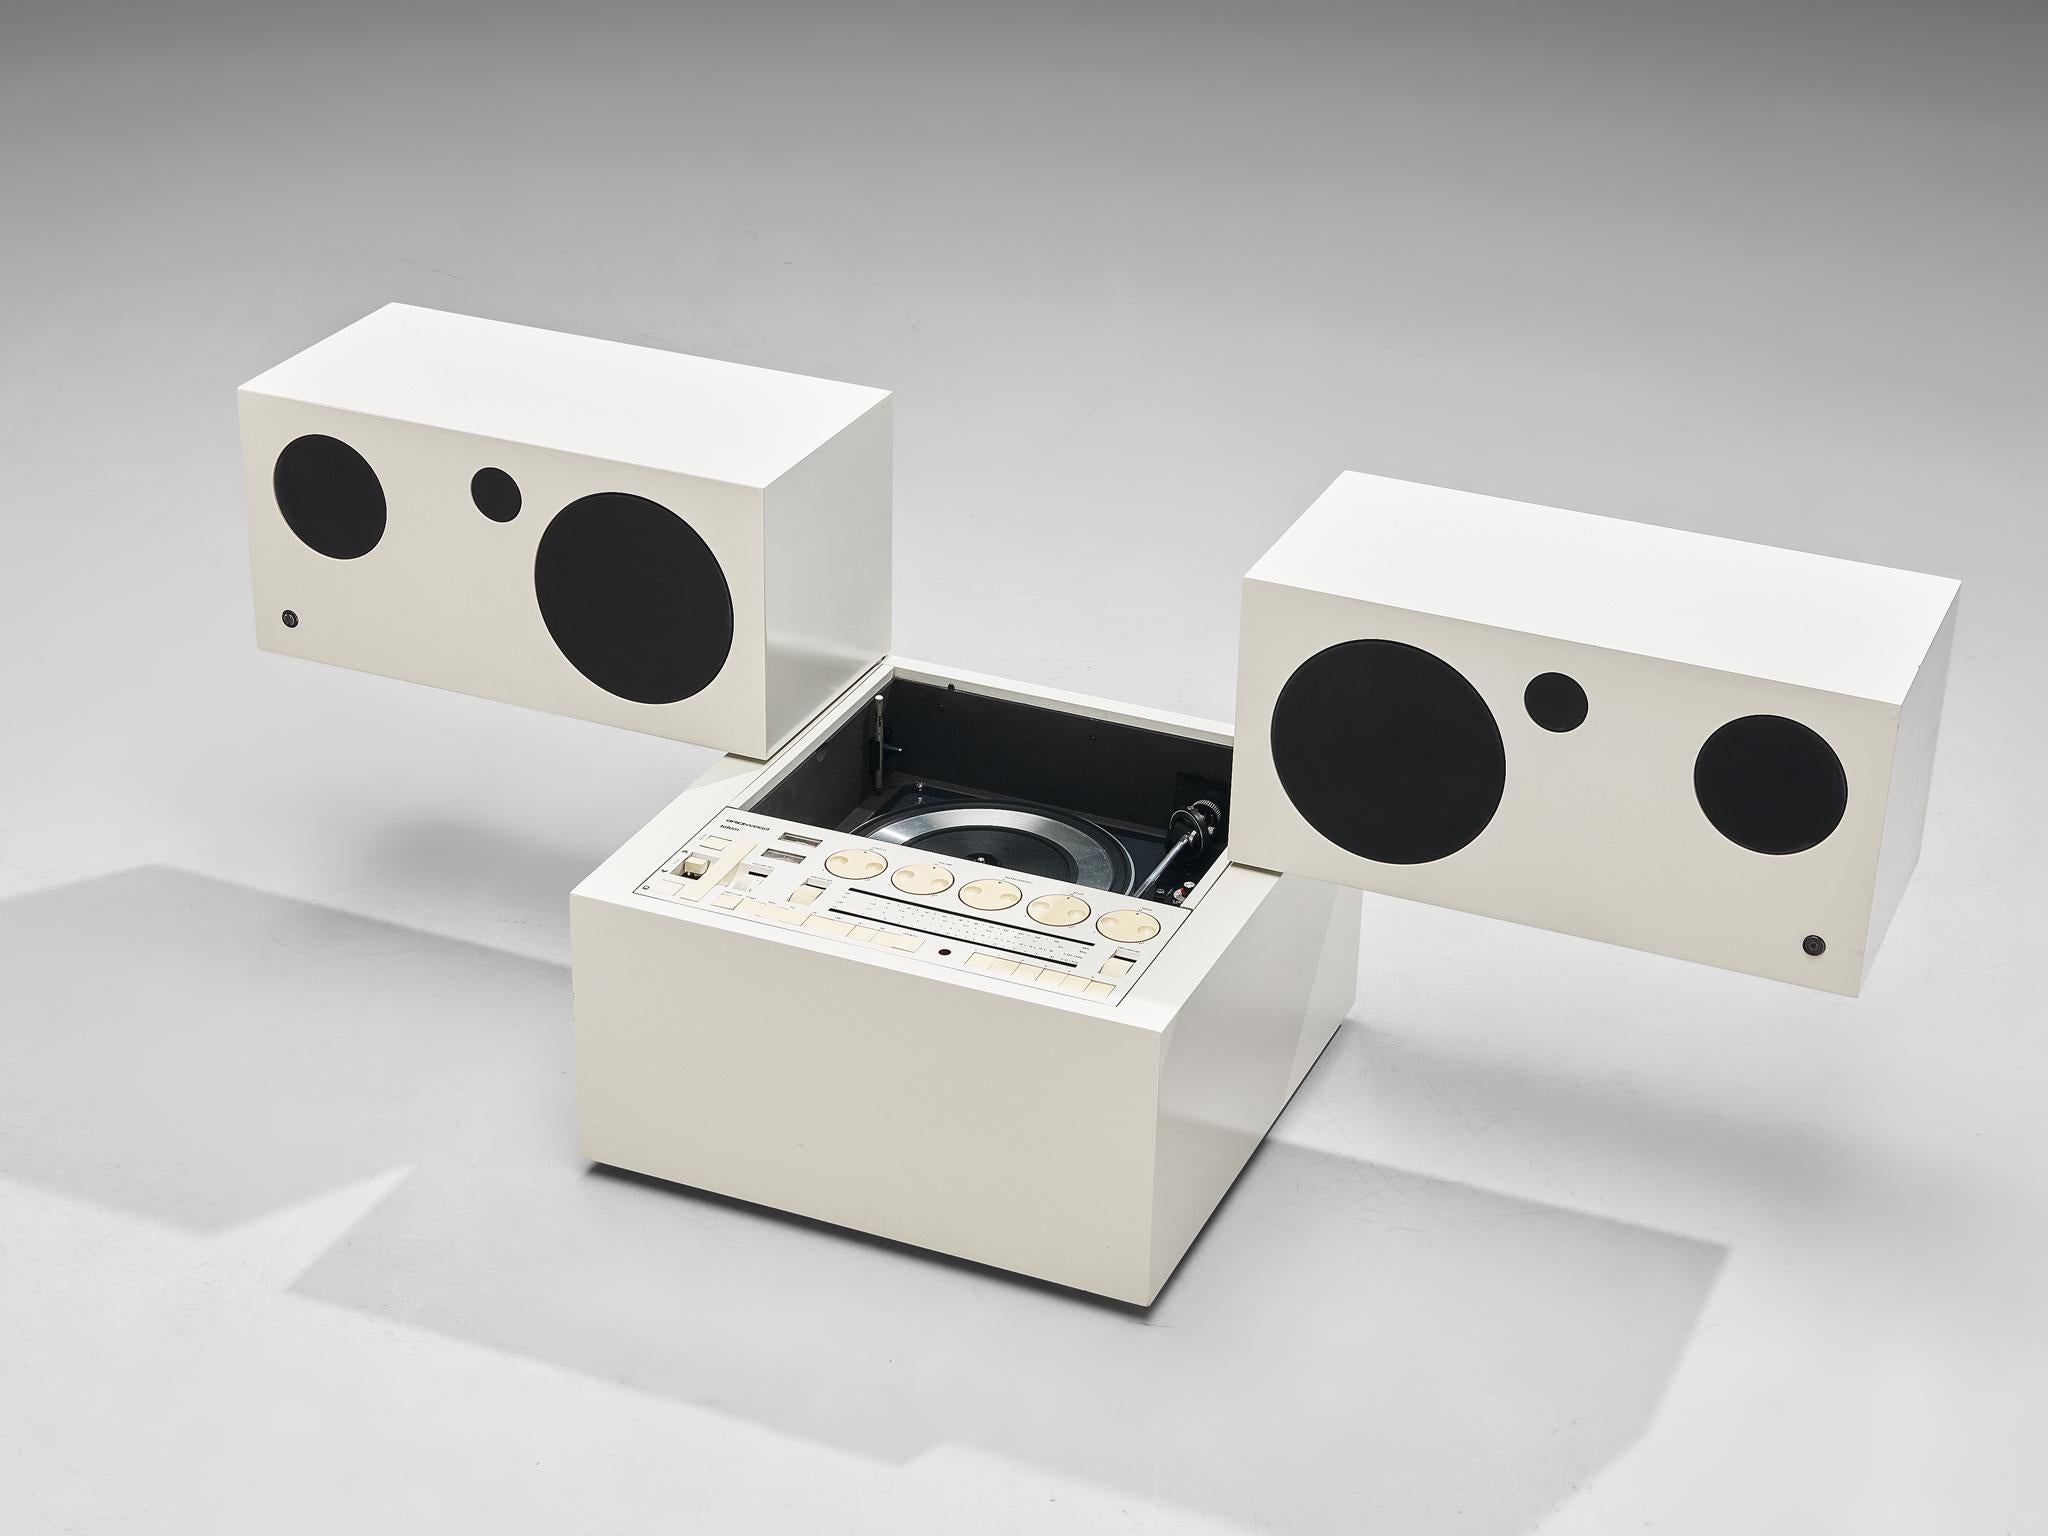 Mario Bellini for Brionvega, 'RR 130 Totem' radiogram, chipboard, plastic laminate, Italy, 1970

Postmodern stereo system designed by Mario Bellini (1935-) for Brionvega, Milan. The stereo consists a white plastic laminated chipboard cube base and